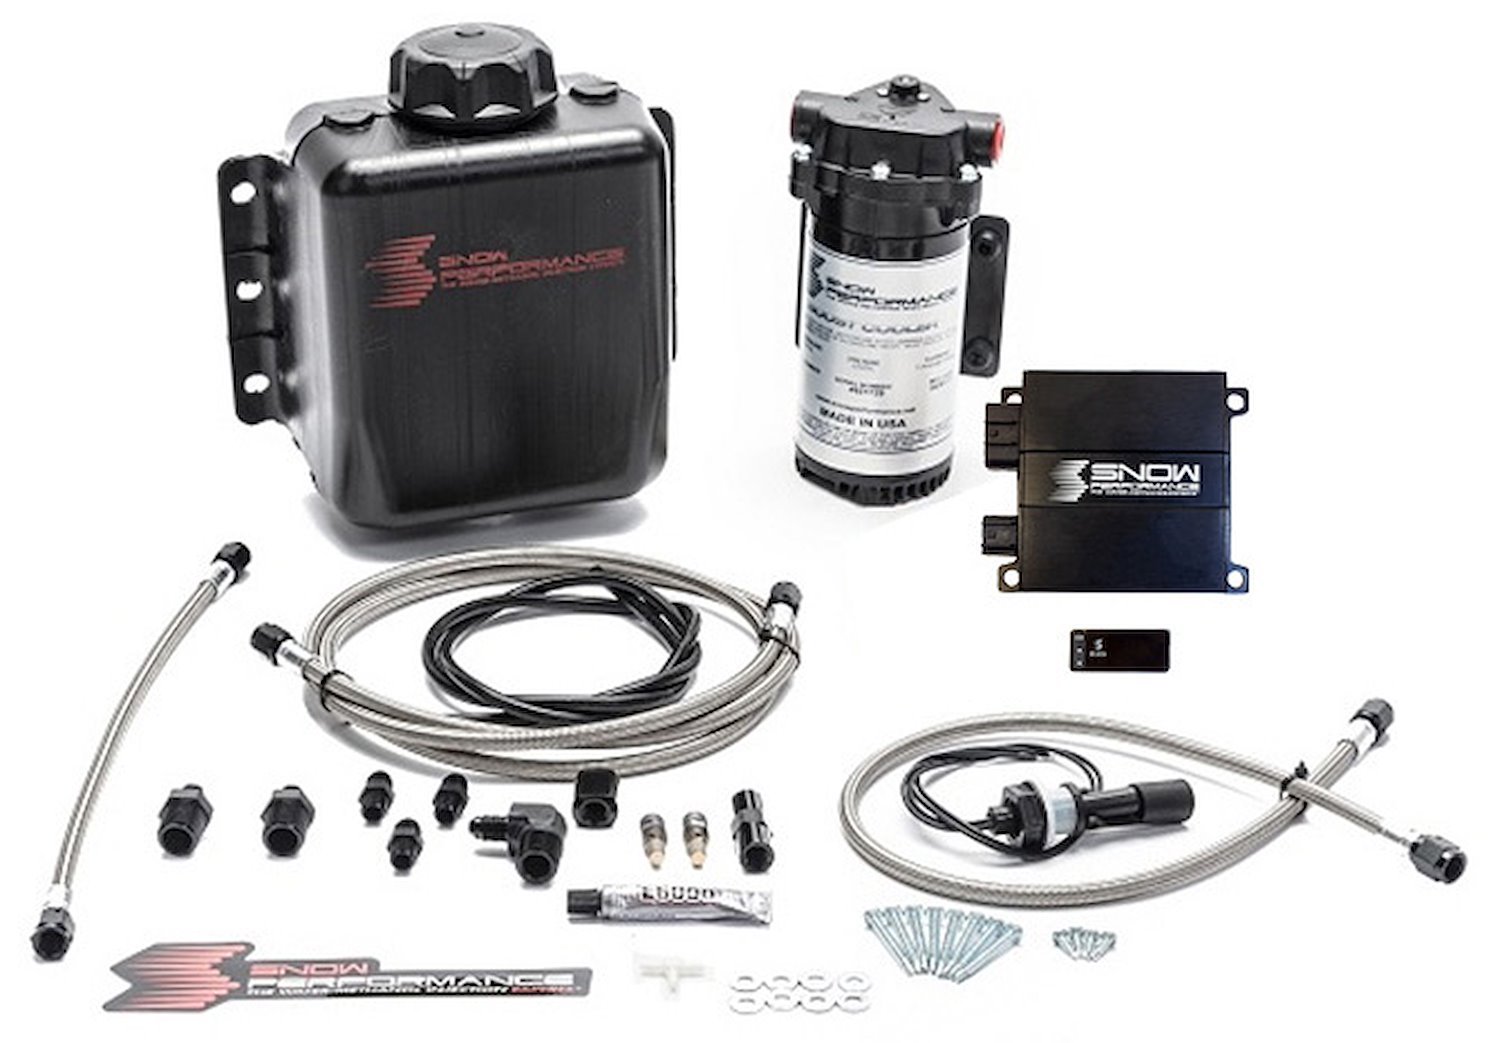 Stage-2 Gasoline Boost Cooler Water-Methanol Injection Kit for Forced Induction Engines